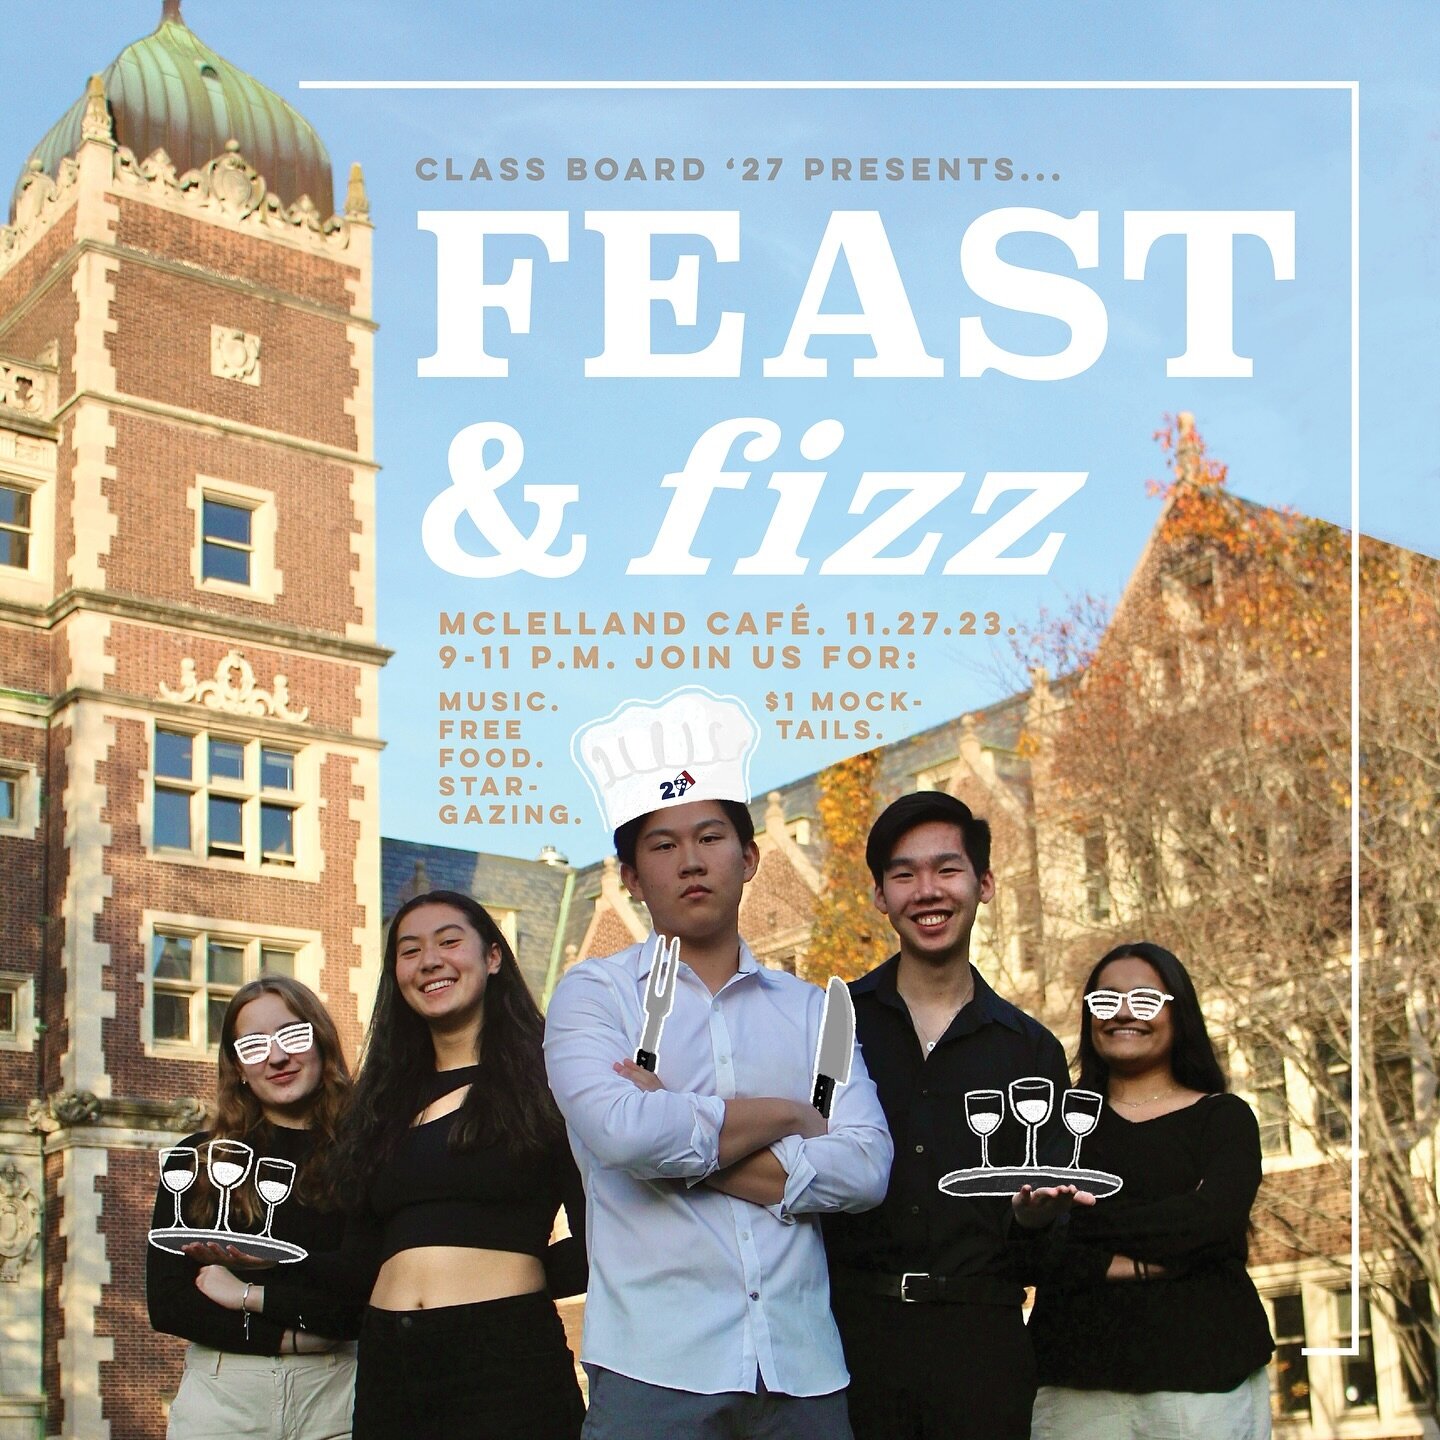 🍽 FEAST AND FIZZ 🥂 | Mon, Nov 27th @ Quad 9 pm to 11 pm

Looking for free food and a time to reconnect with friends after break? Get hyped for Feast and Fizz with catered food, mocktails, and music by DJ Faraz! ALL FRESHMEN INVITED!